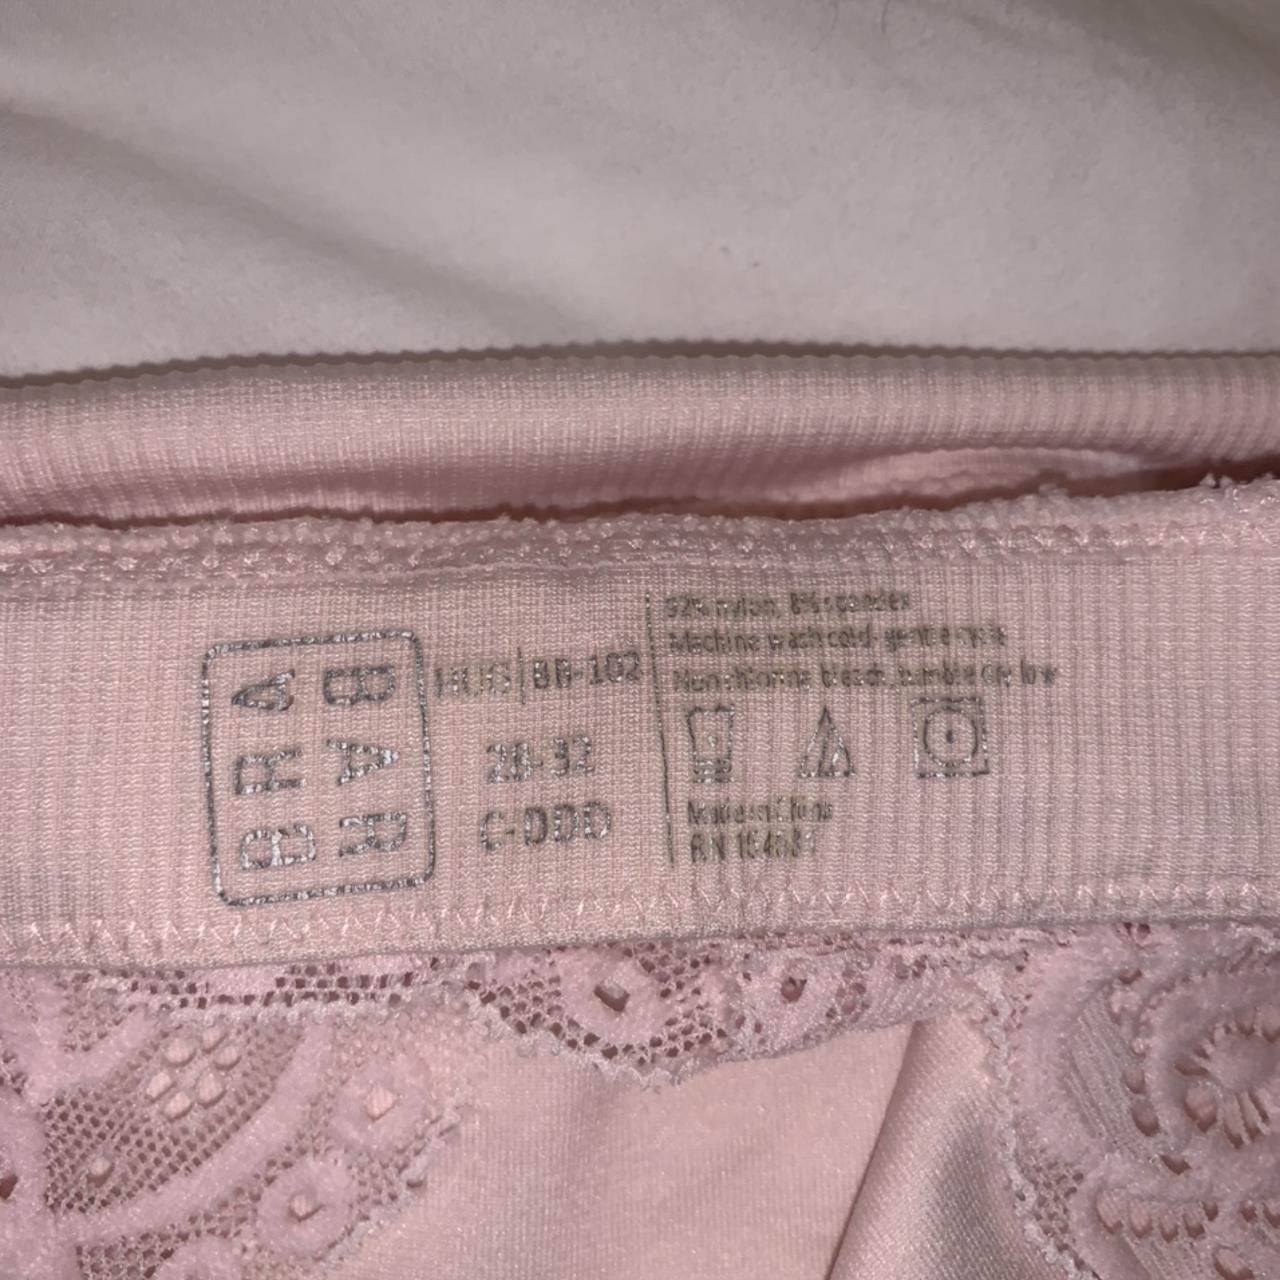 Product Image 4 - light pink bralette

new

fits size xs/s

I’m